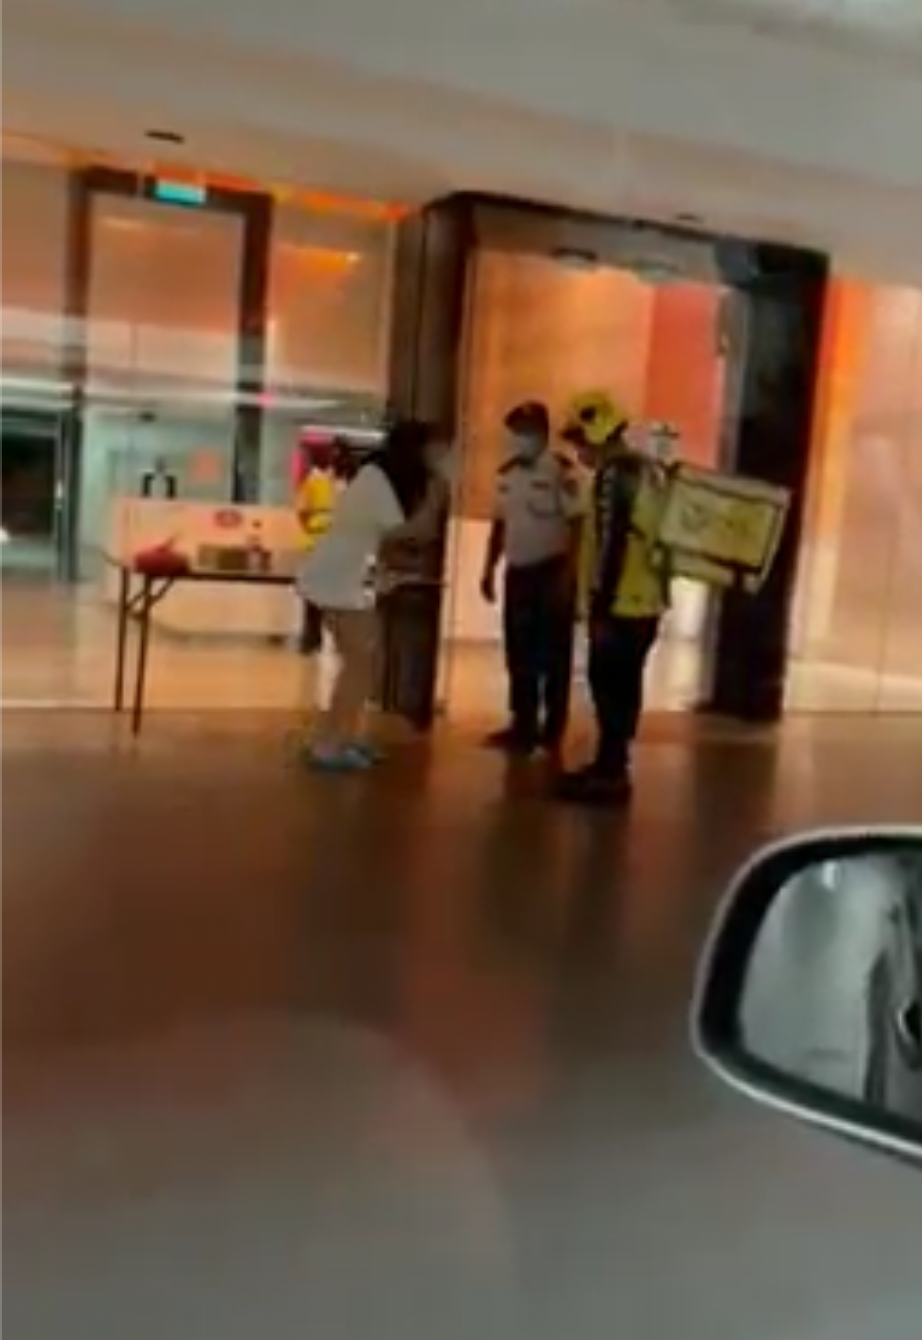 Foreigner in kl splashed bubble tea at security guard